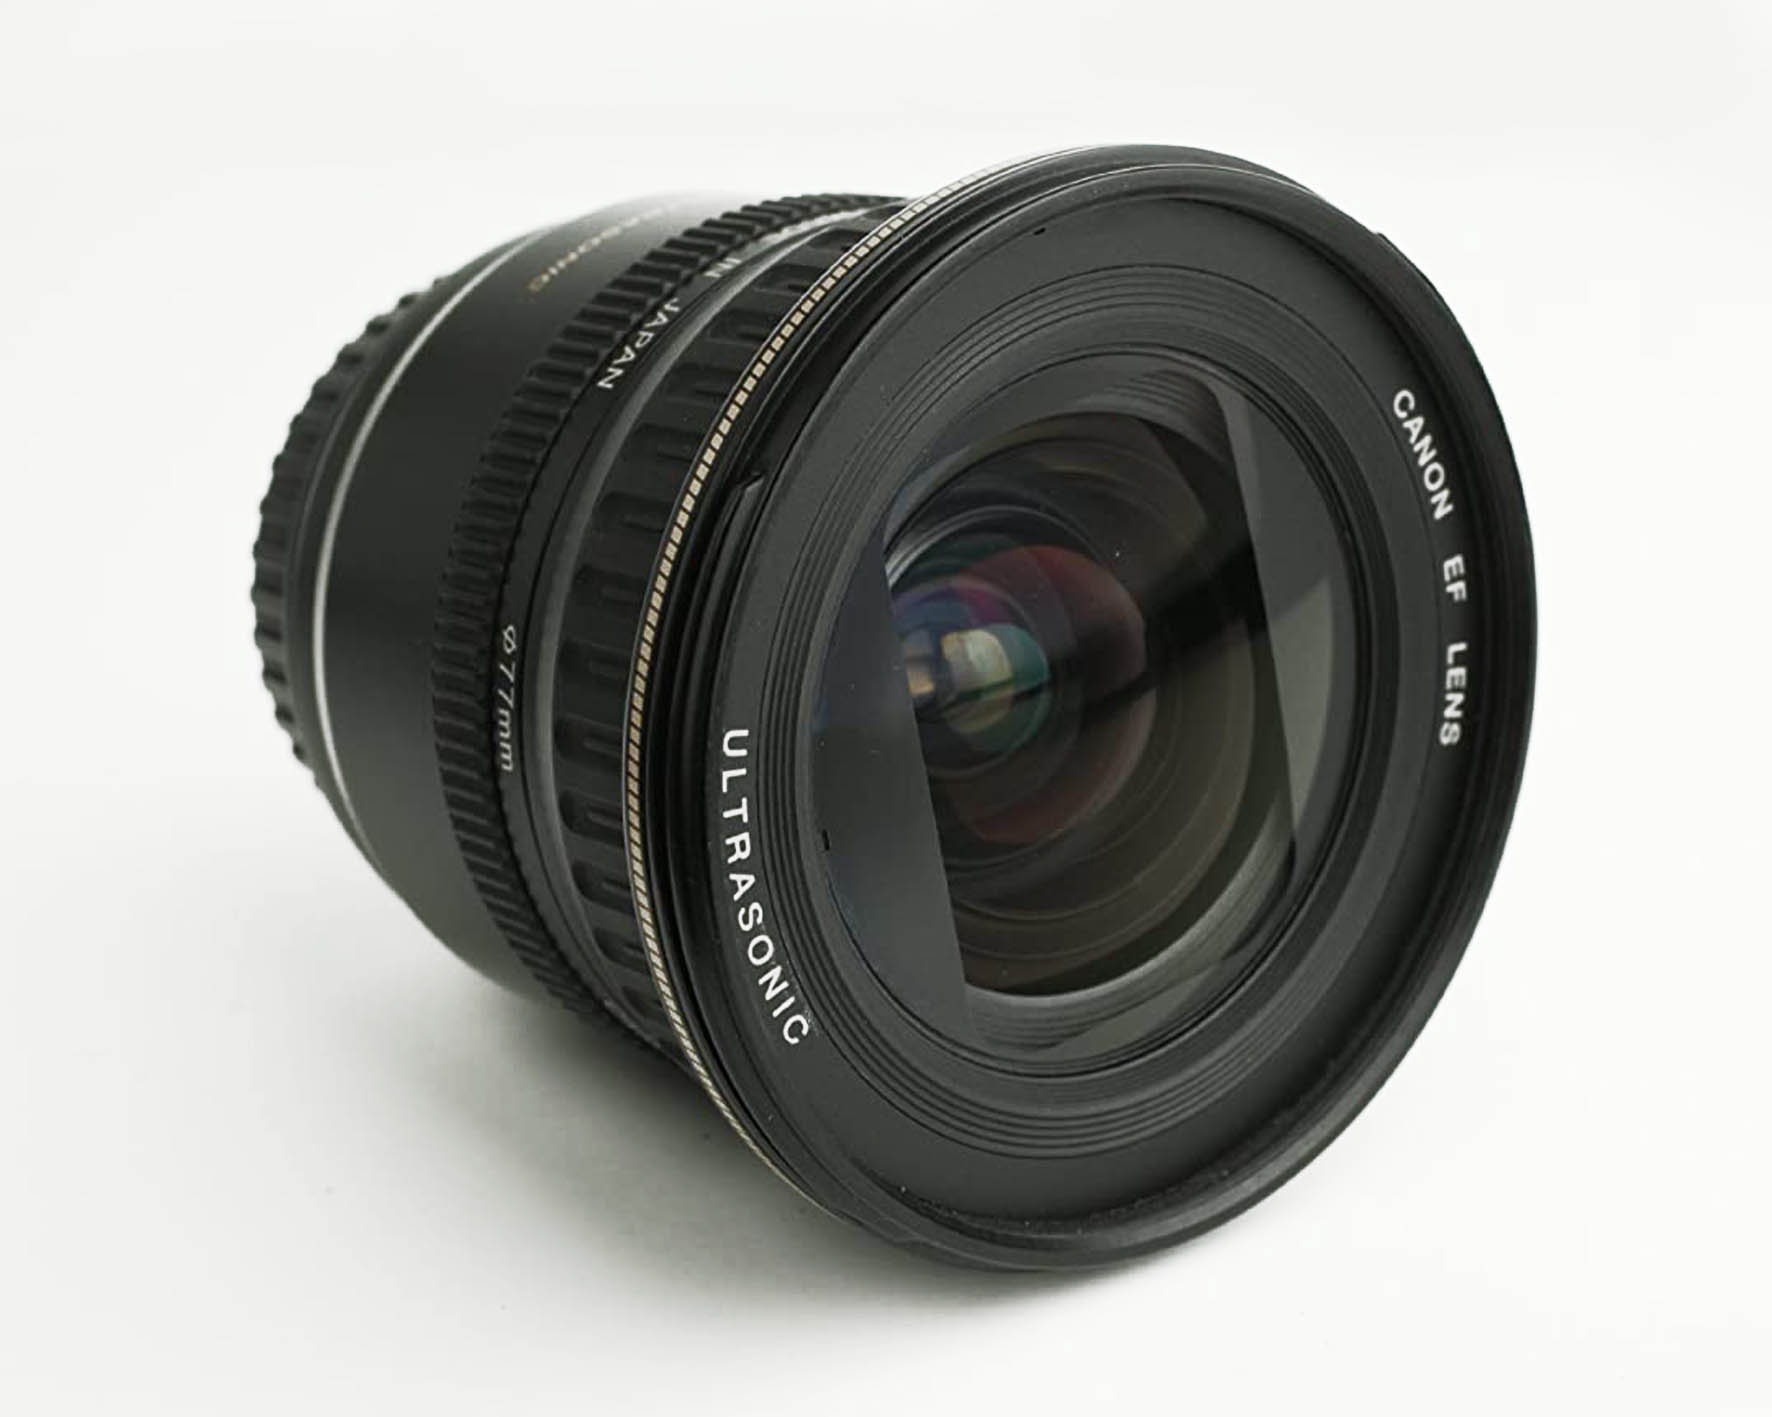 Canon EF 20-35mm f/3.5-4.5 USM Ultra Wide